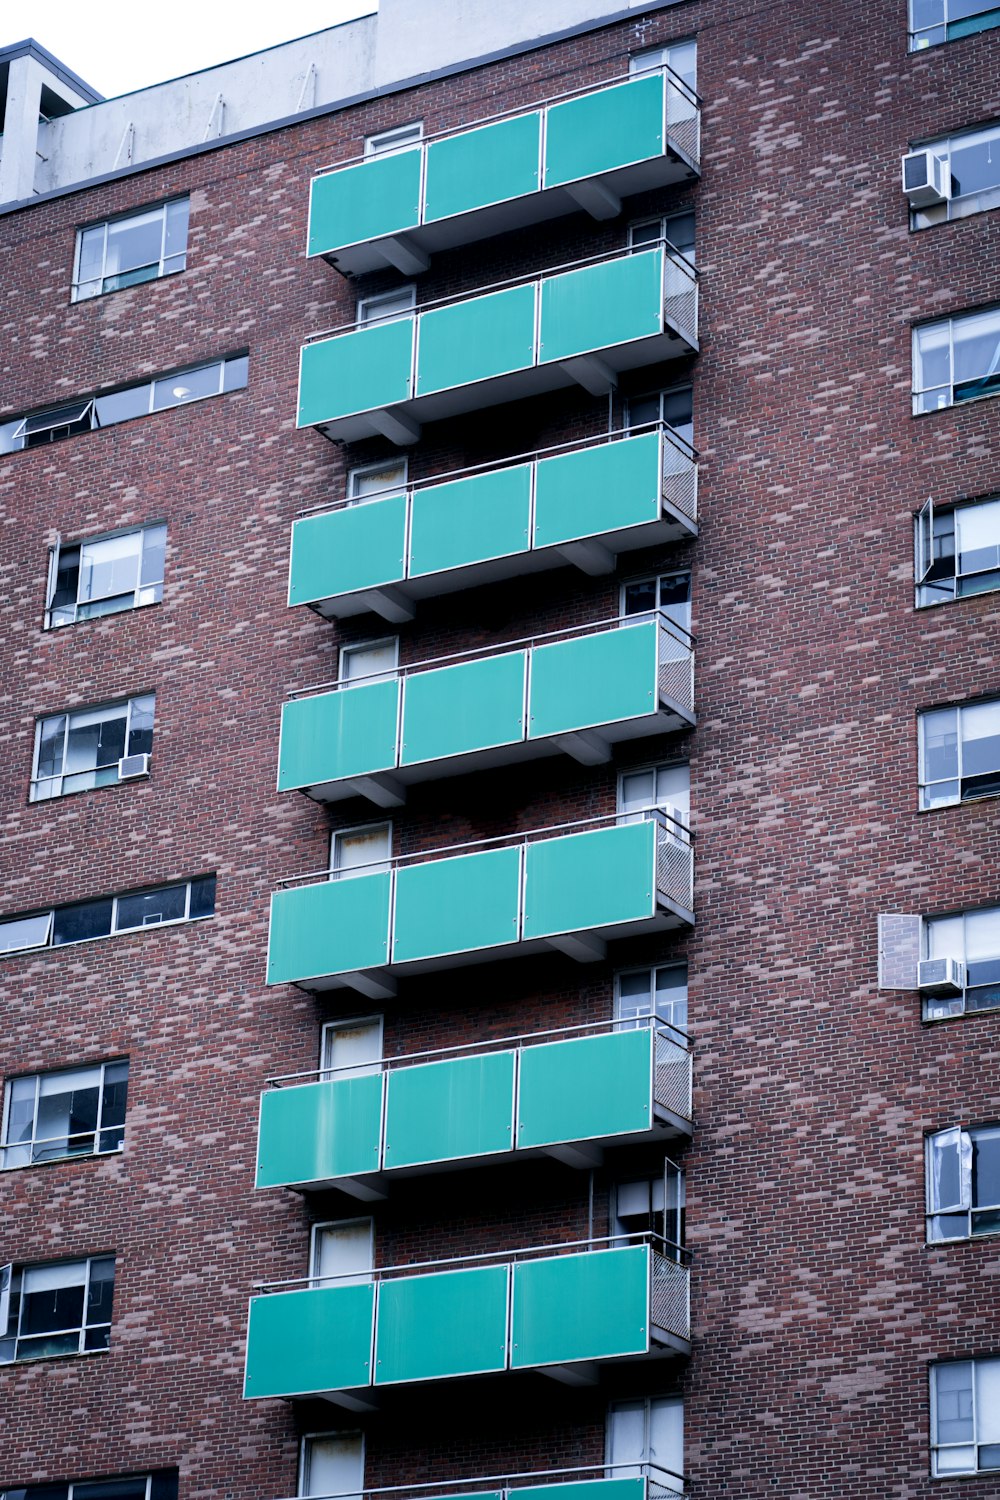 a tall brick building with balconies and green balconies